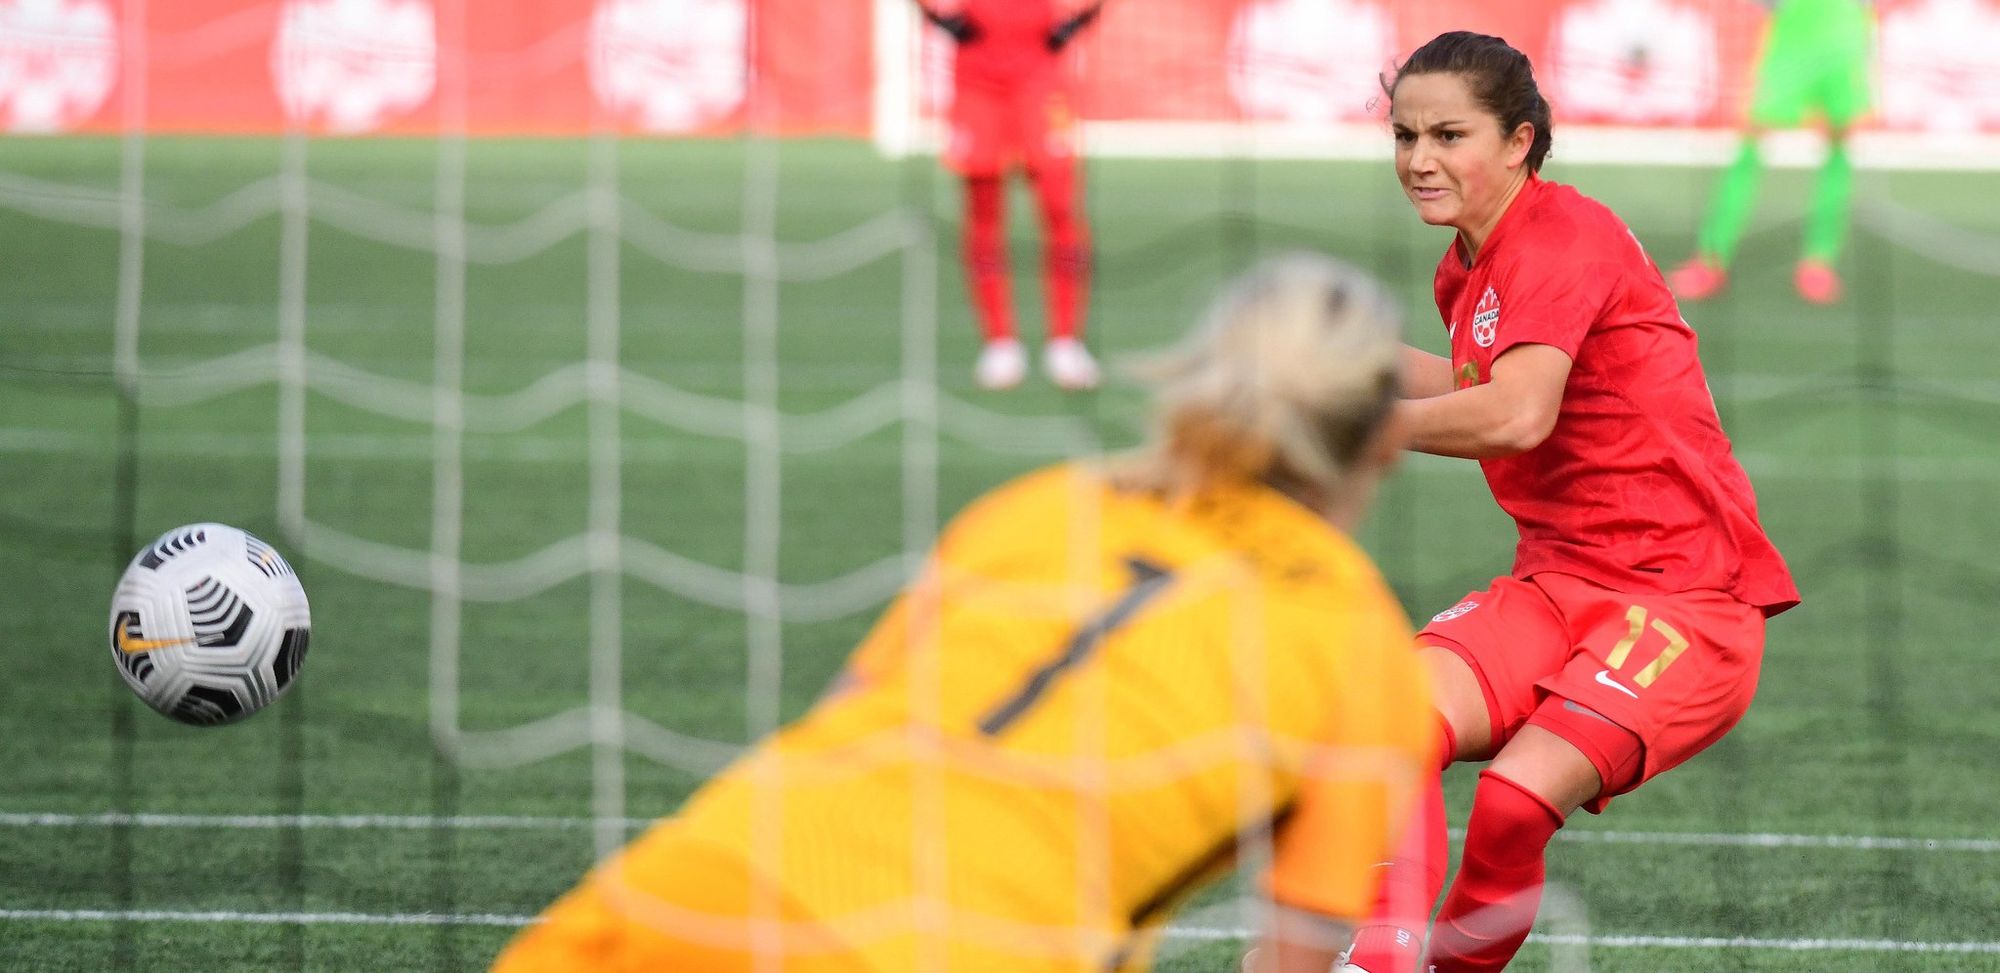 CanWNT Talk: A welcome return home for the Reds